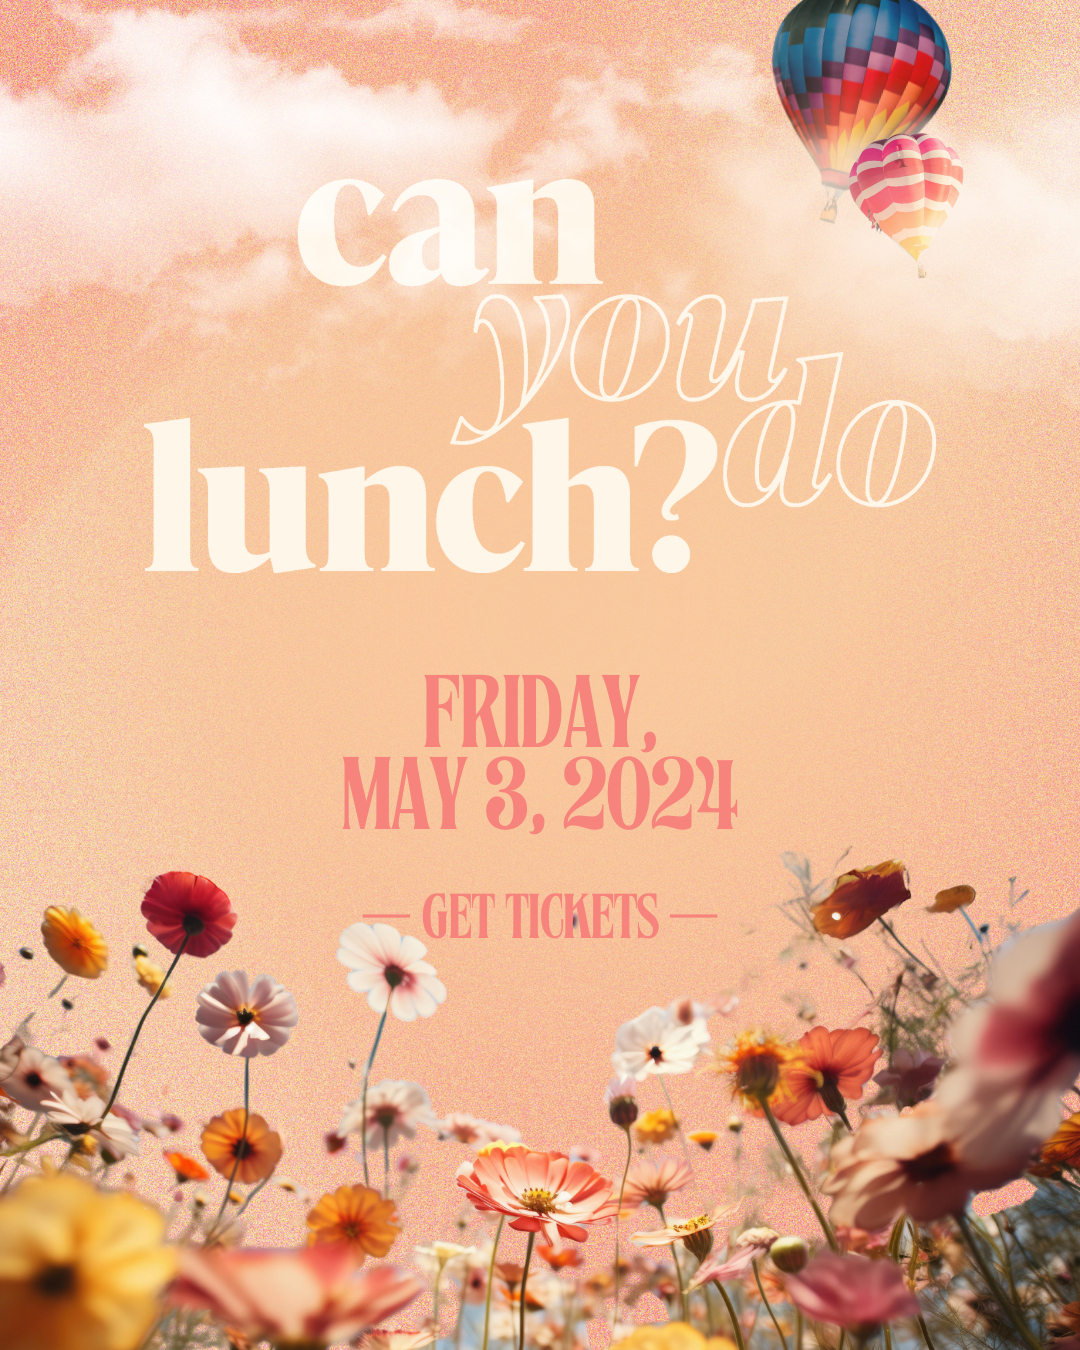 can you do lunch poster with flowers, clouds and the date of the event, friday, may 3, 2024